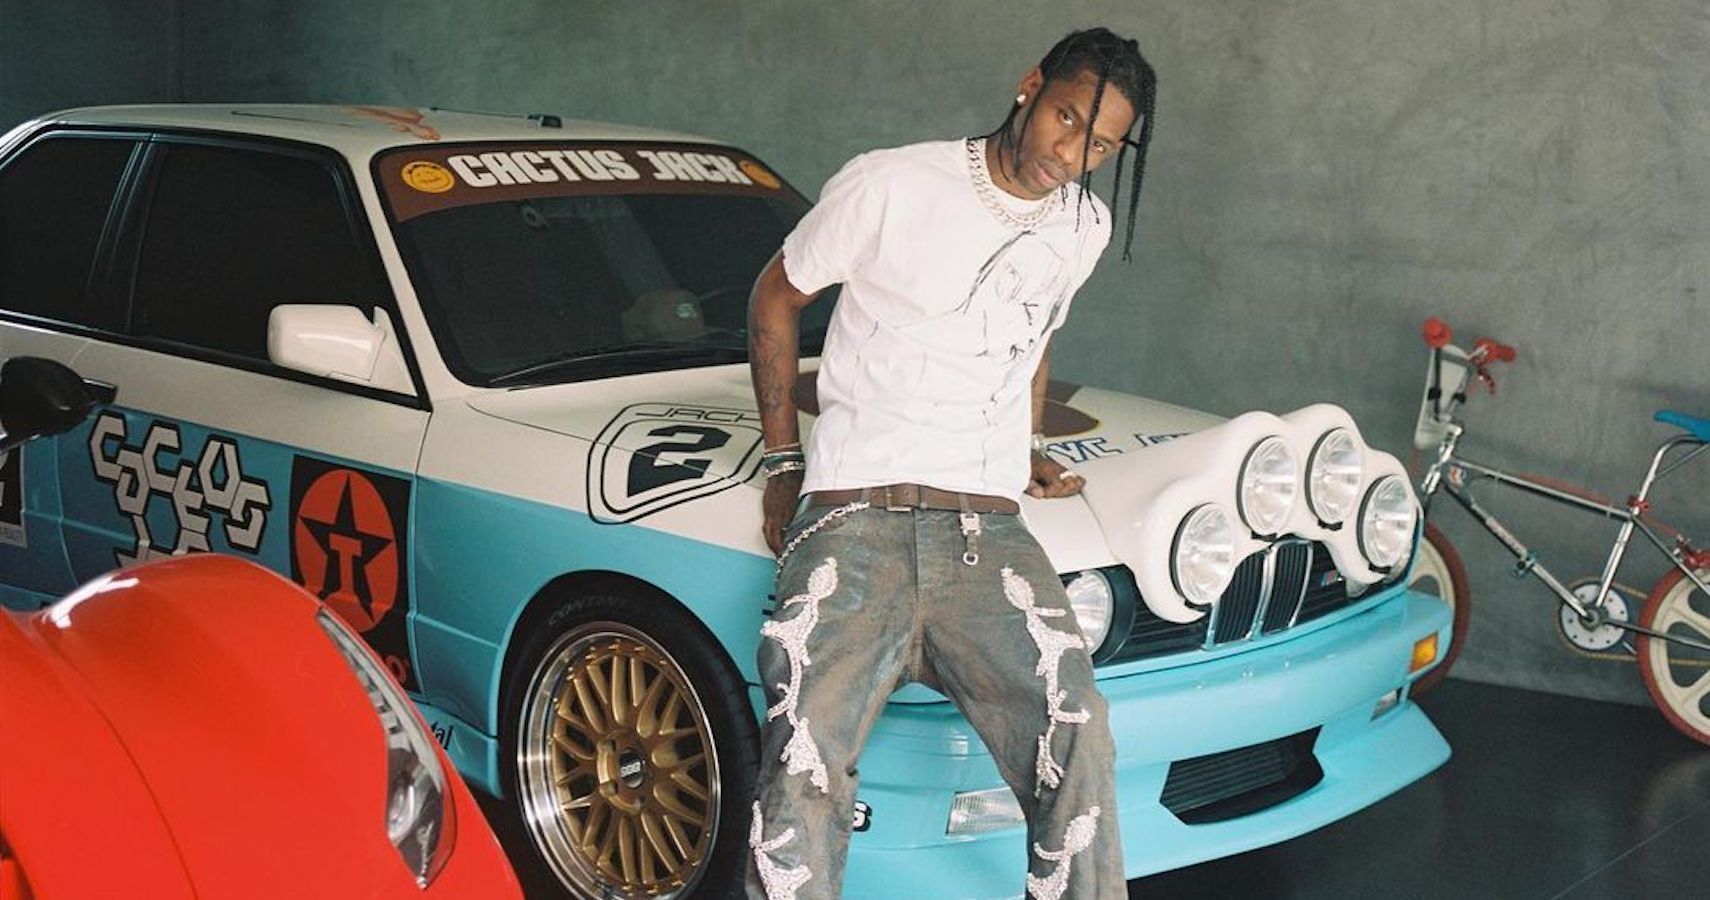 Here S The Full Story Behind Travis Scott S Blasphemous 0 Told By An M3 Purist